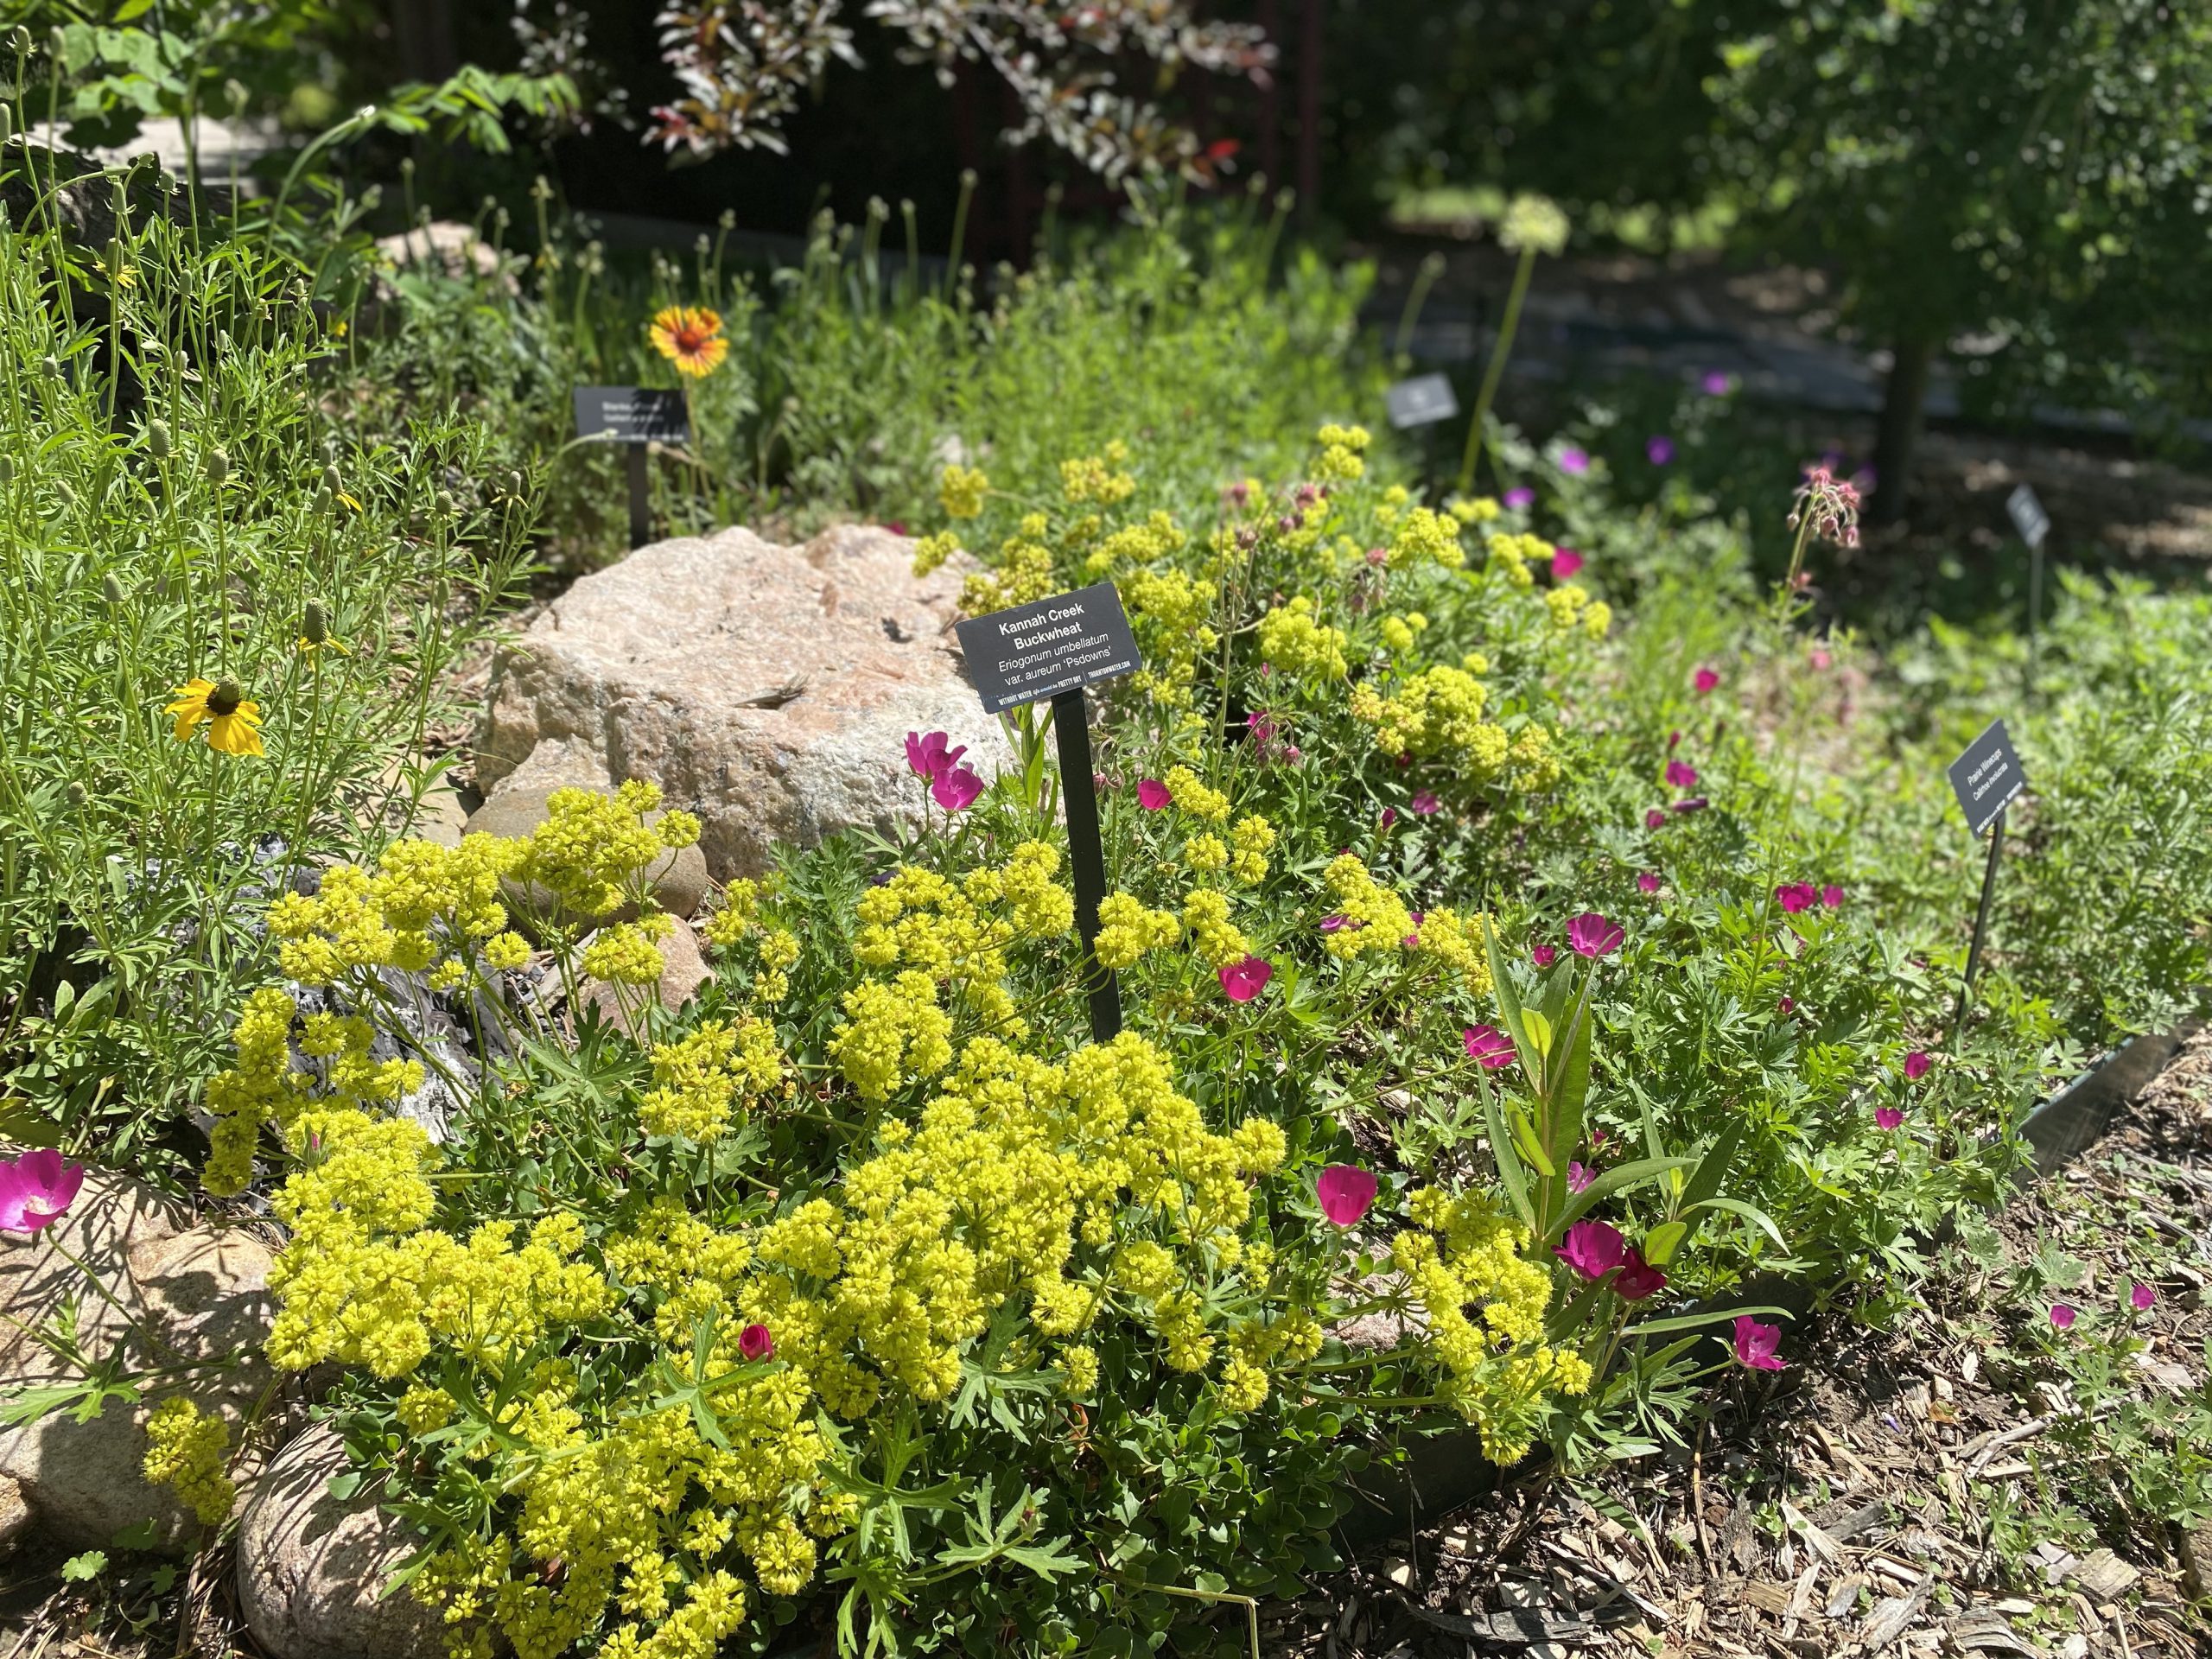 Yellow and purple flowers grow on a light green bush next to a tan rock.